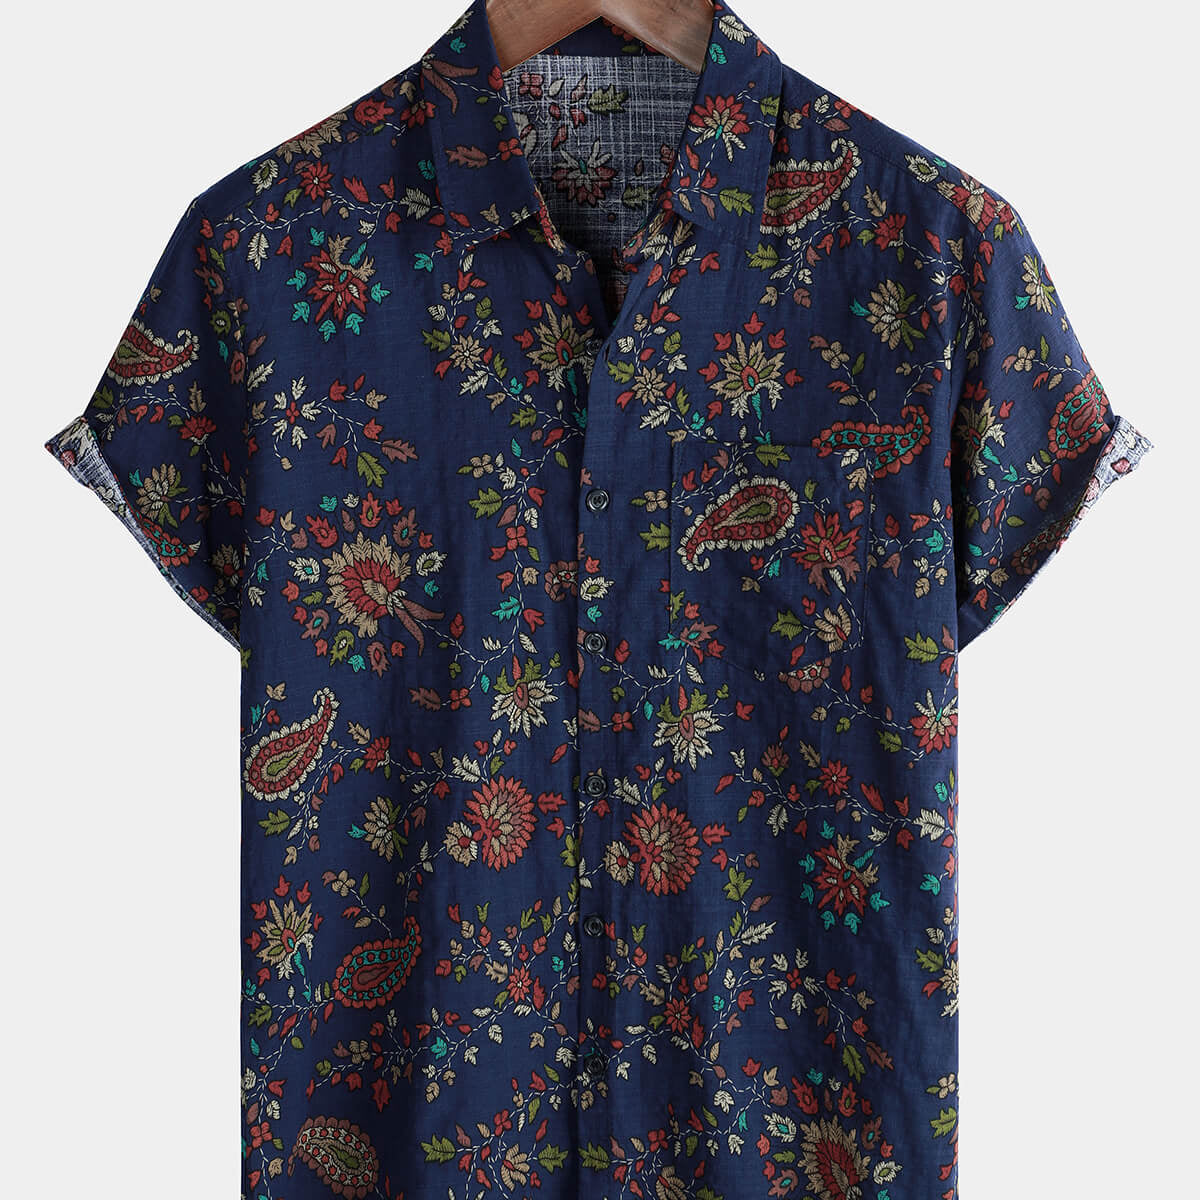 Men's Paisley Floral Holiday Casual Pocket Short Sleeve Button Up Shirt